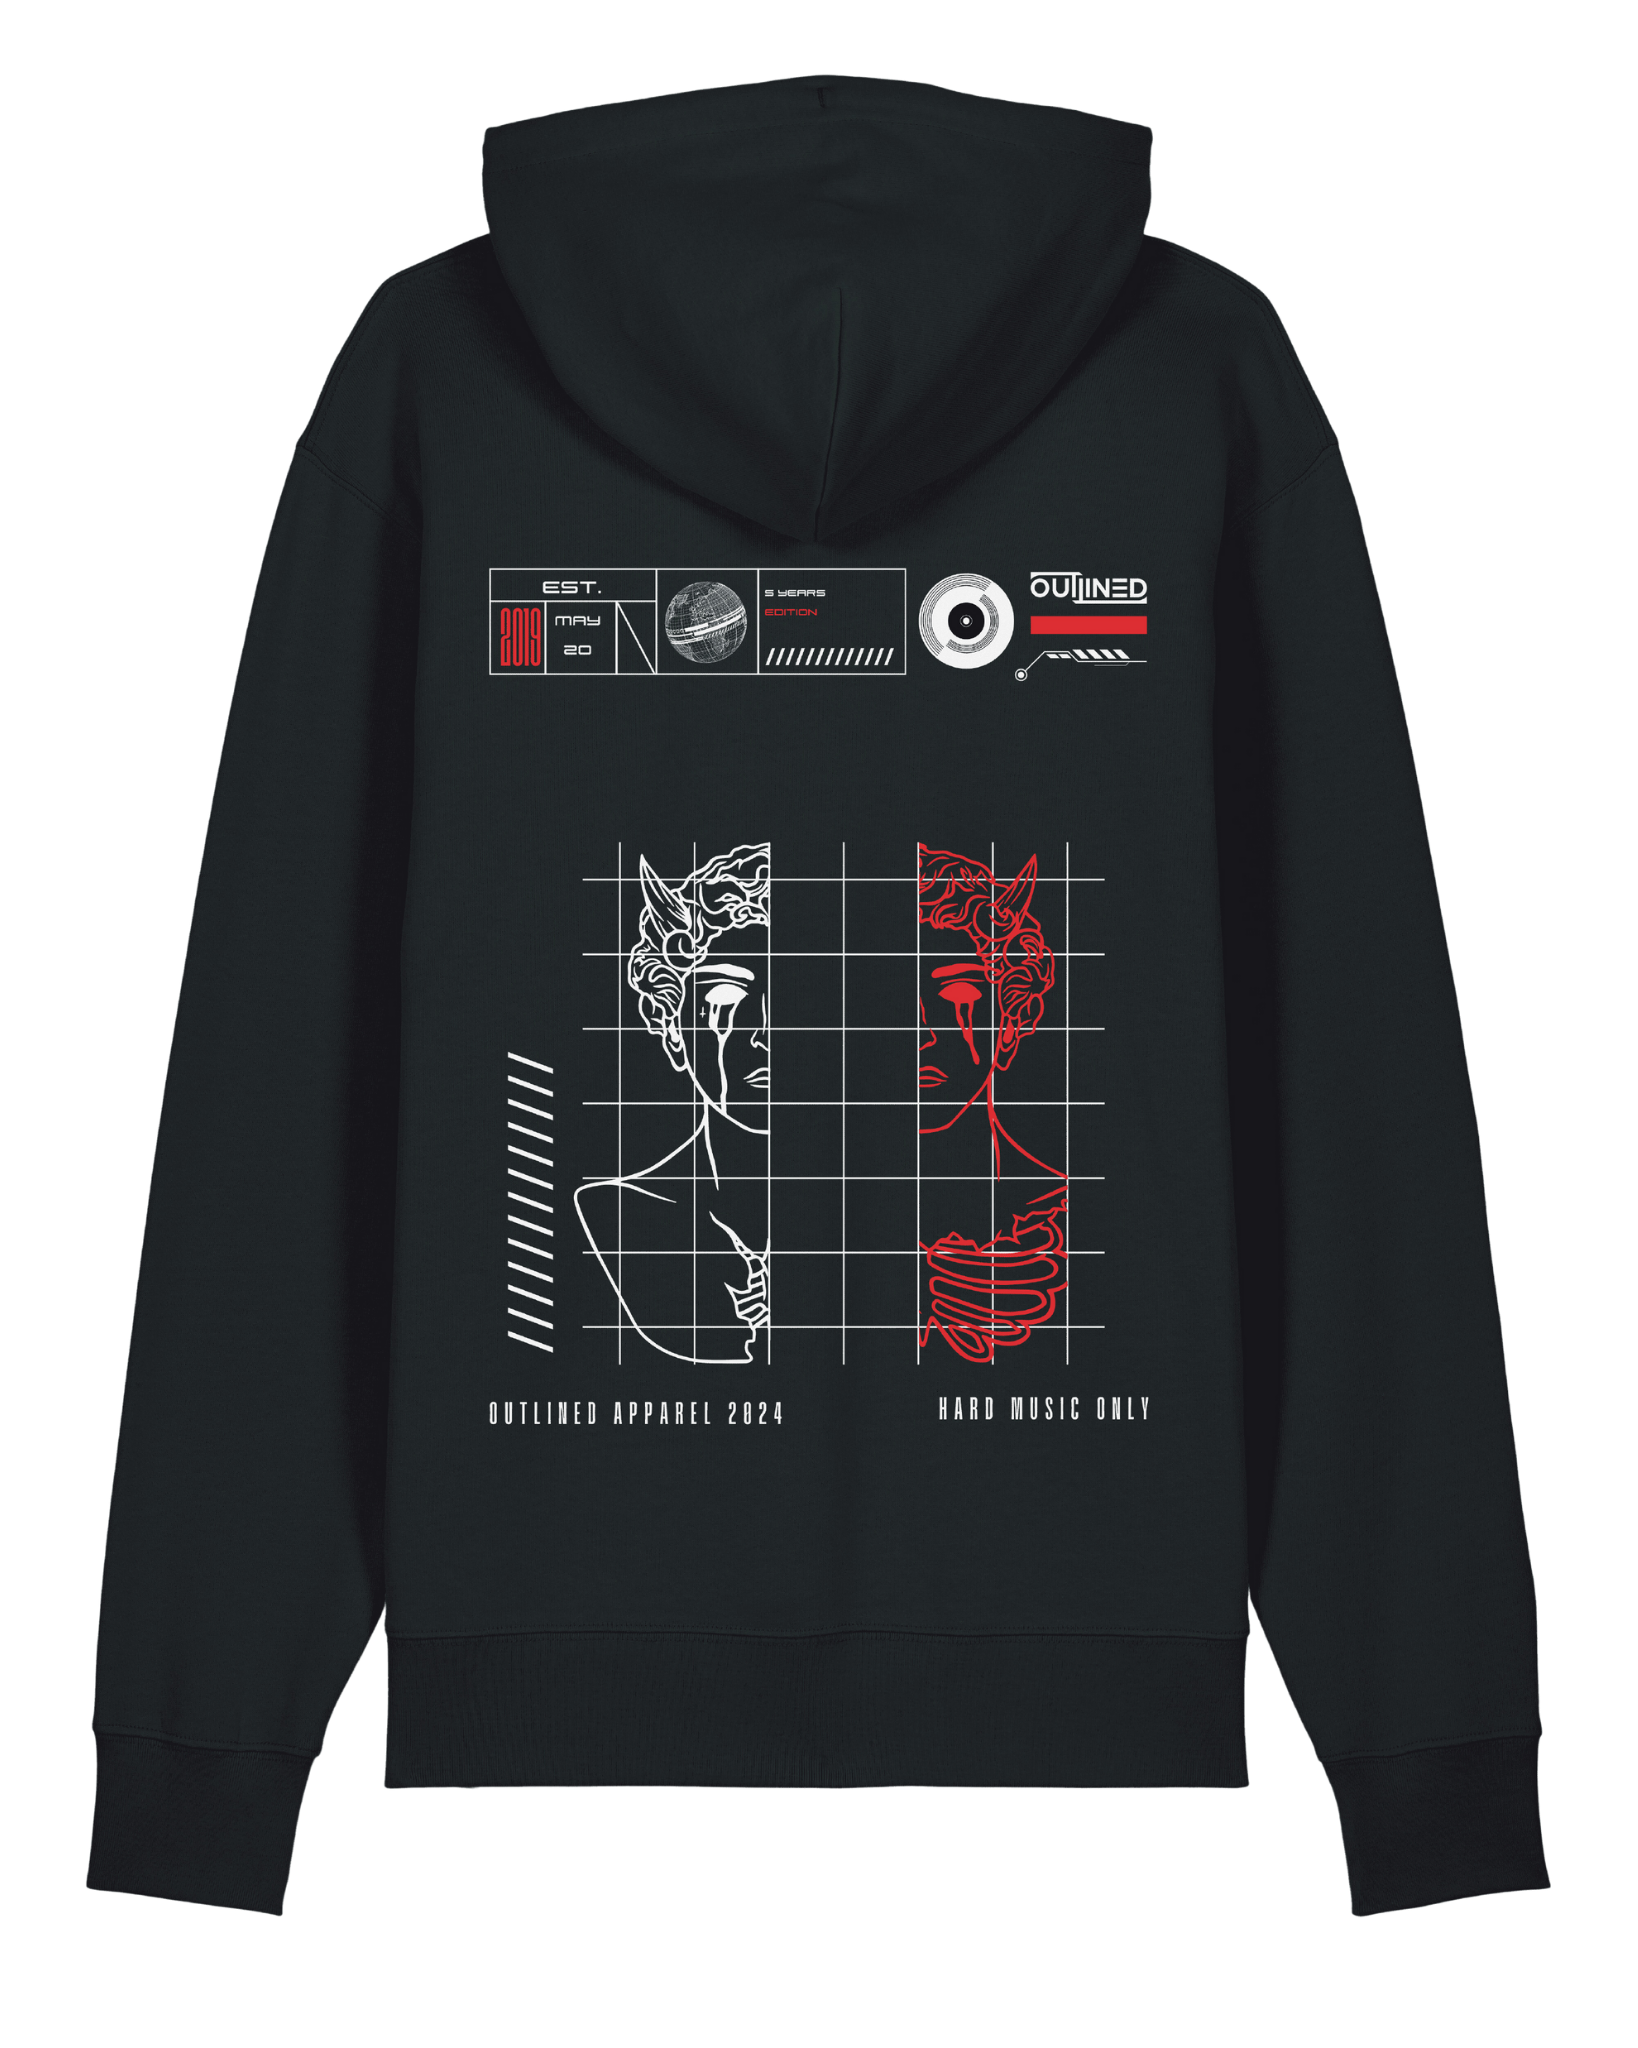 PREMIUM HOODIE | OUTLINED APPAREL 2024 | DJ OUTLINED